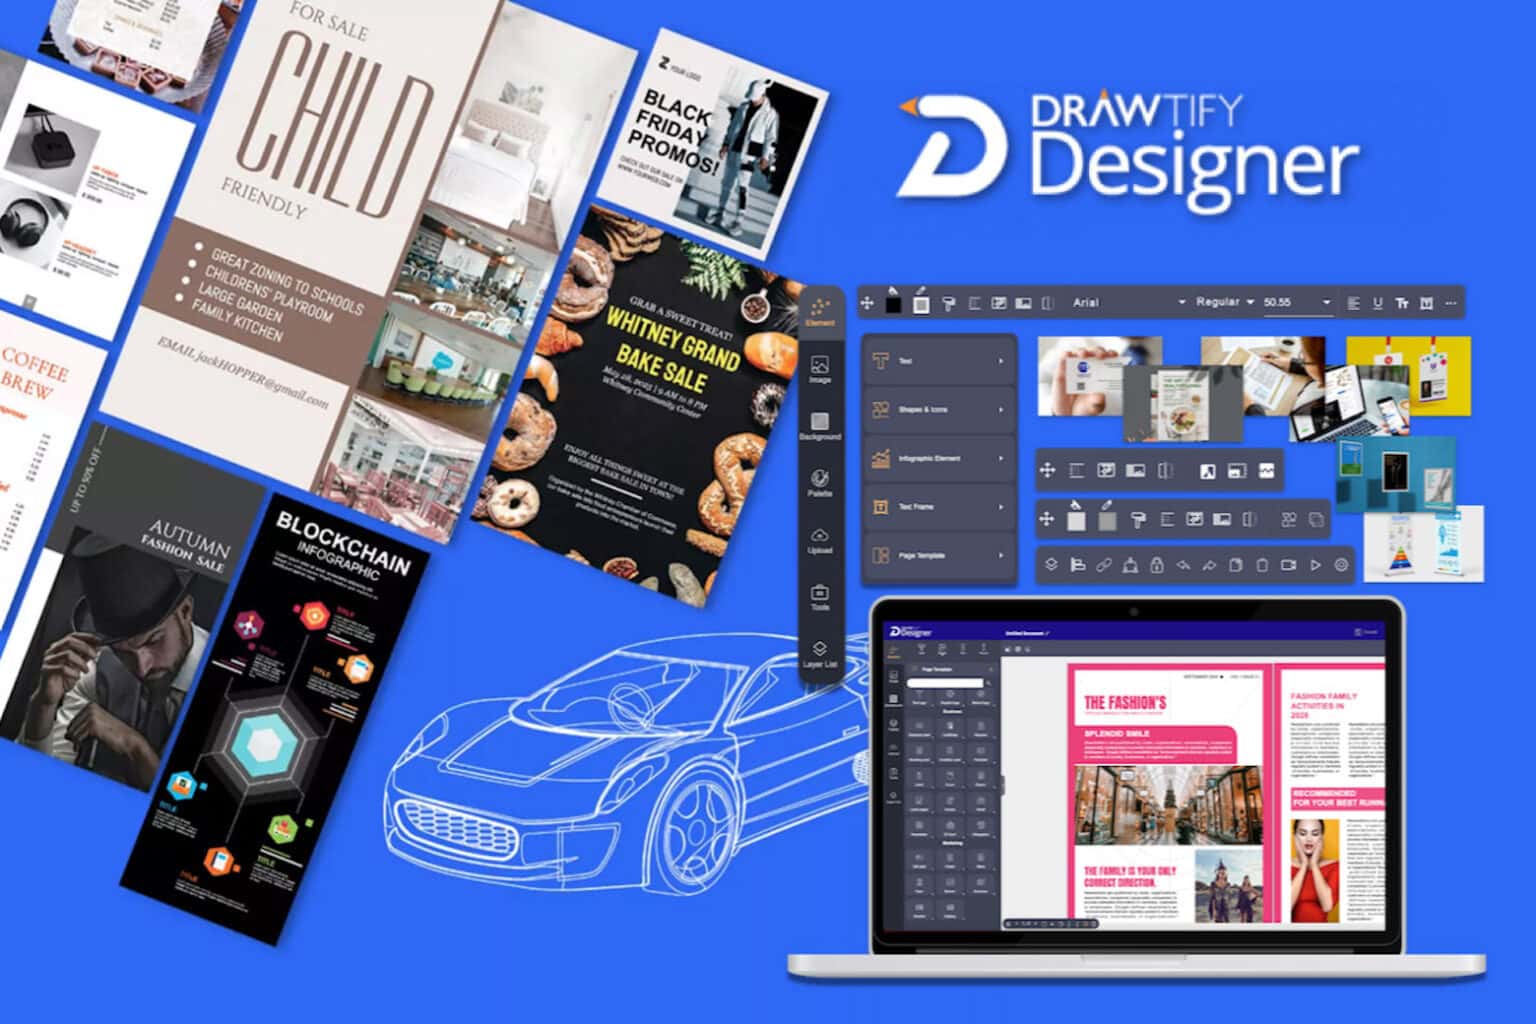 Drawtify Graphic Design Program is 91% off now.